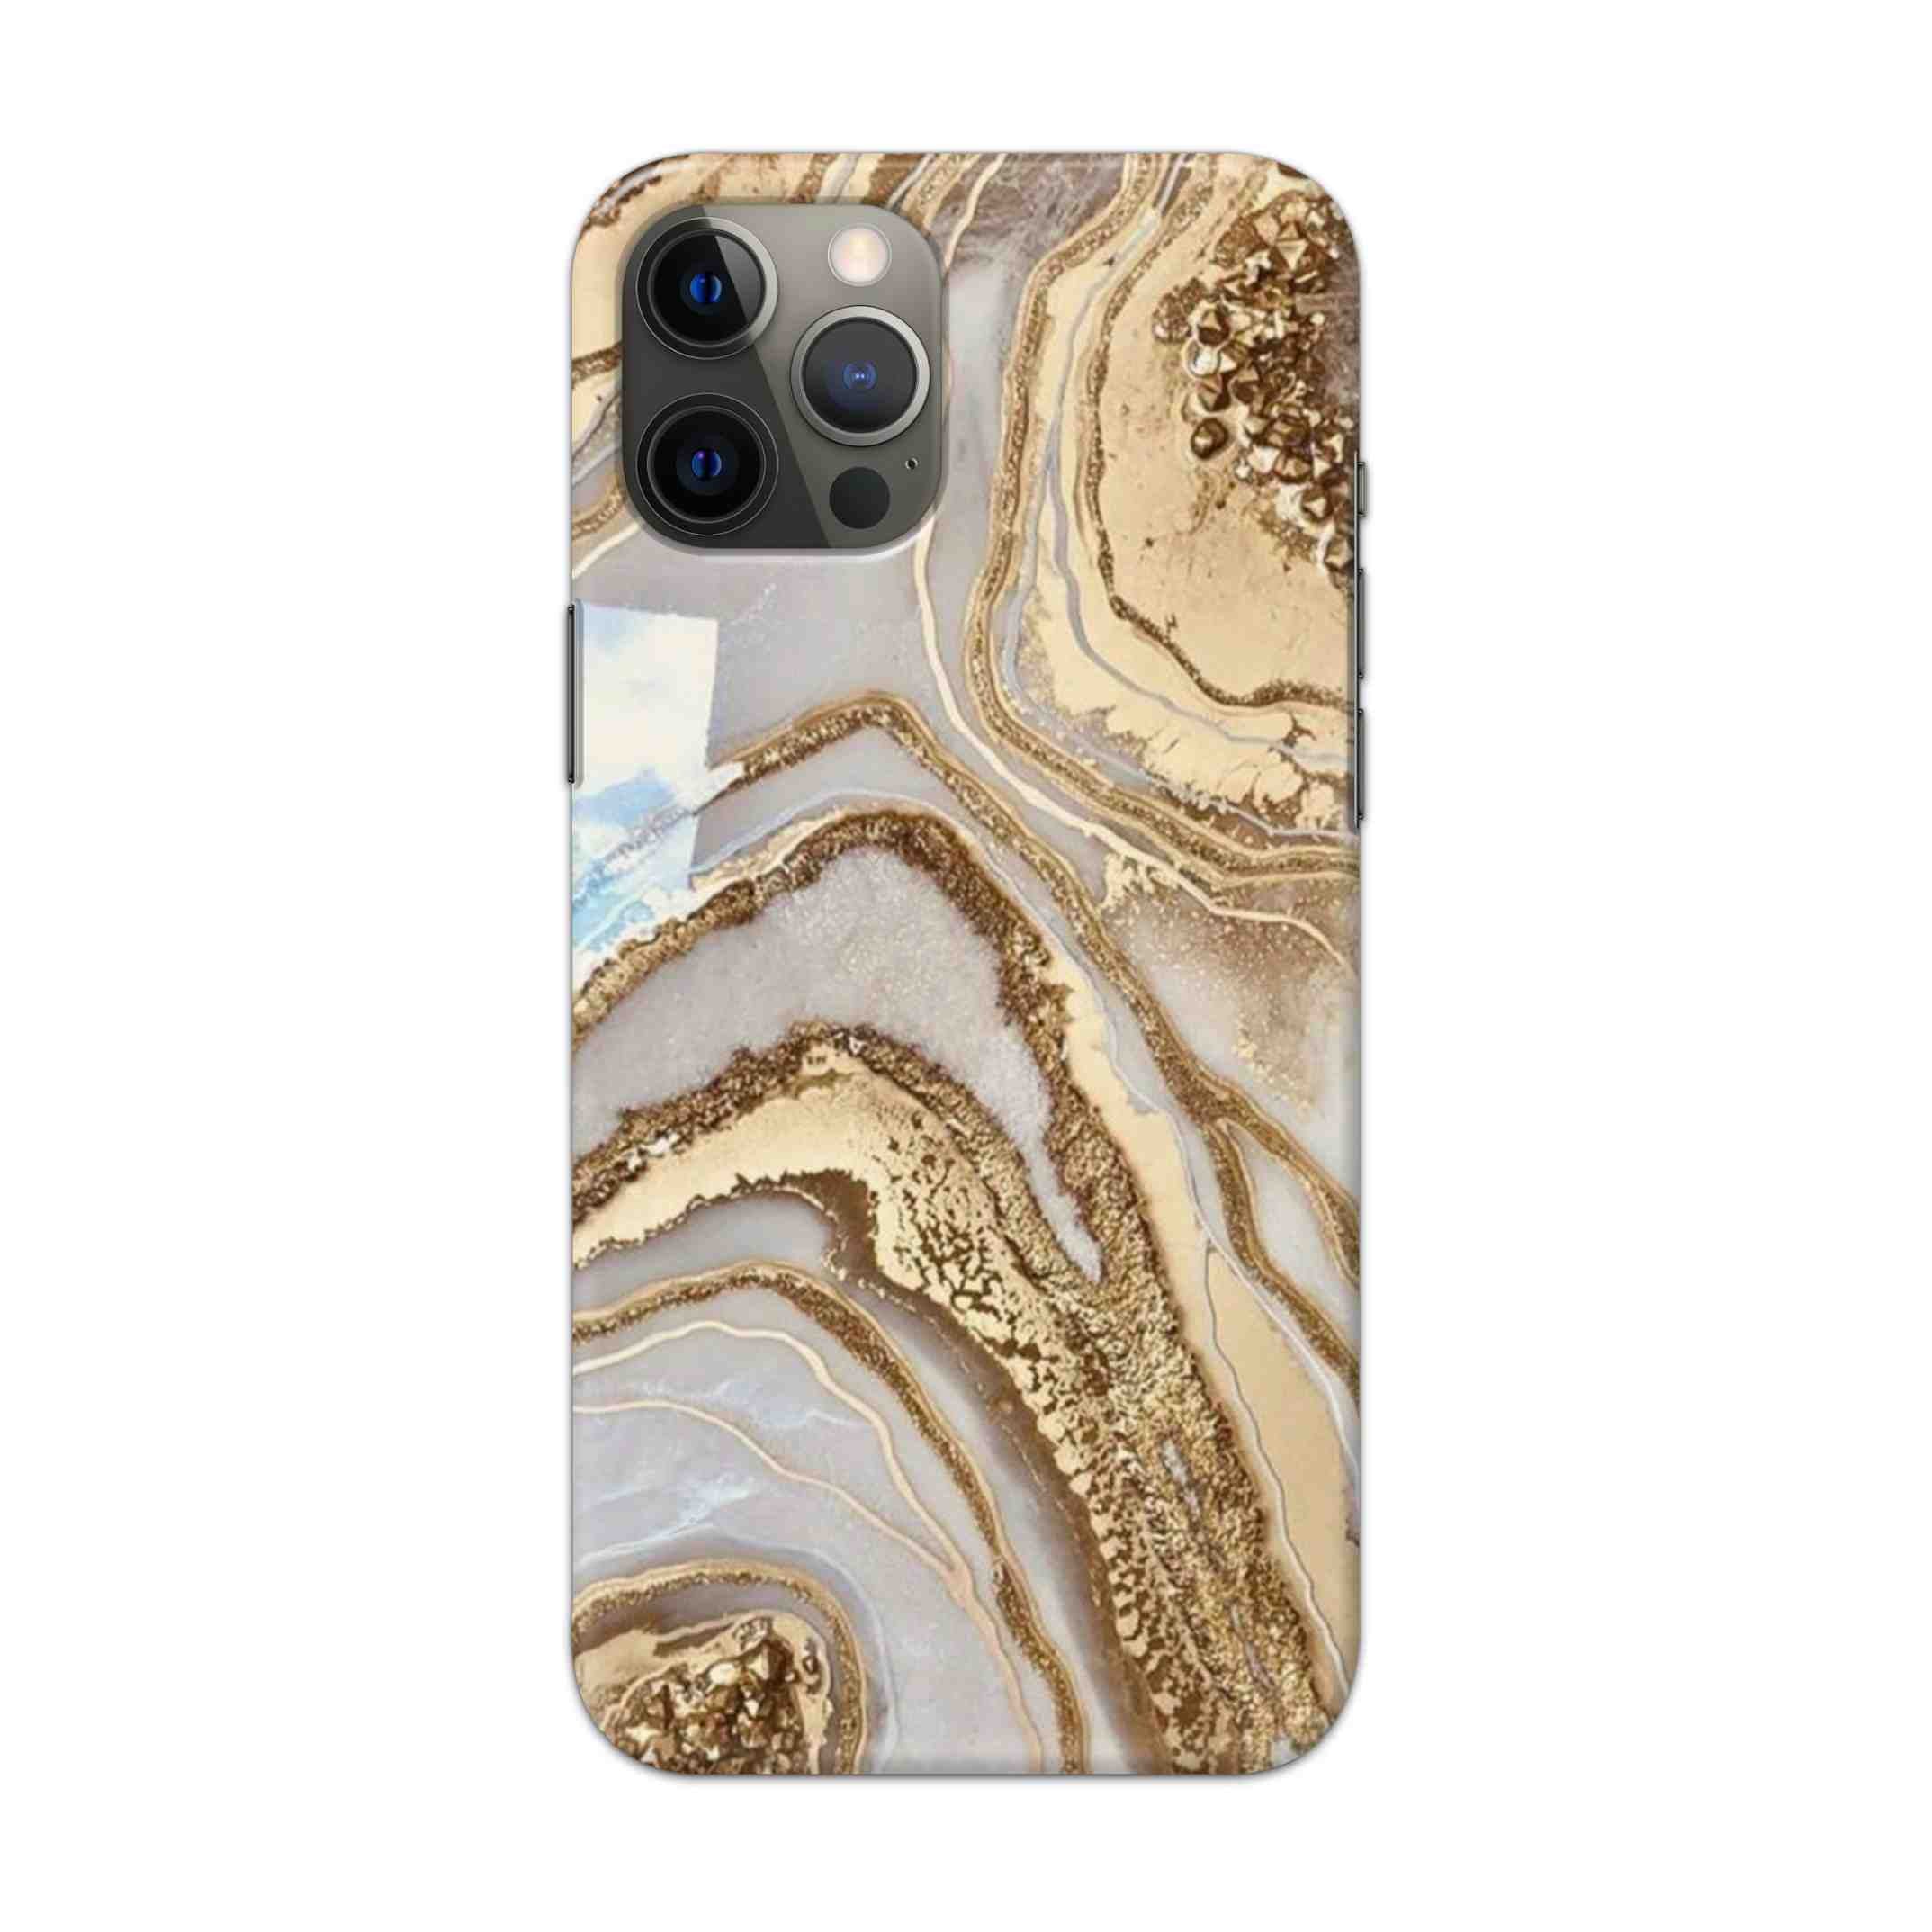 Buy Golden Texture Hard Back Mobile Phone Case Cover For Apple iPhone 12 pro max Online